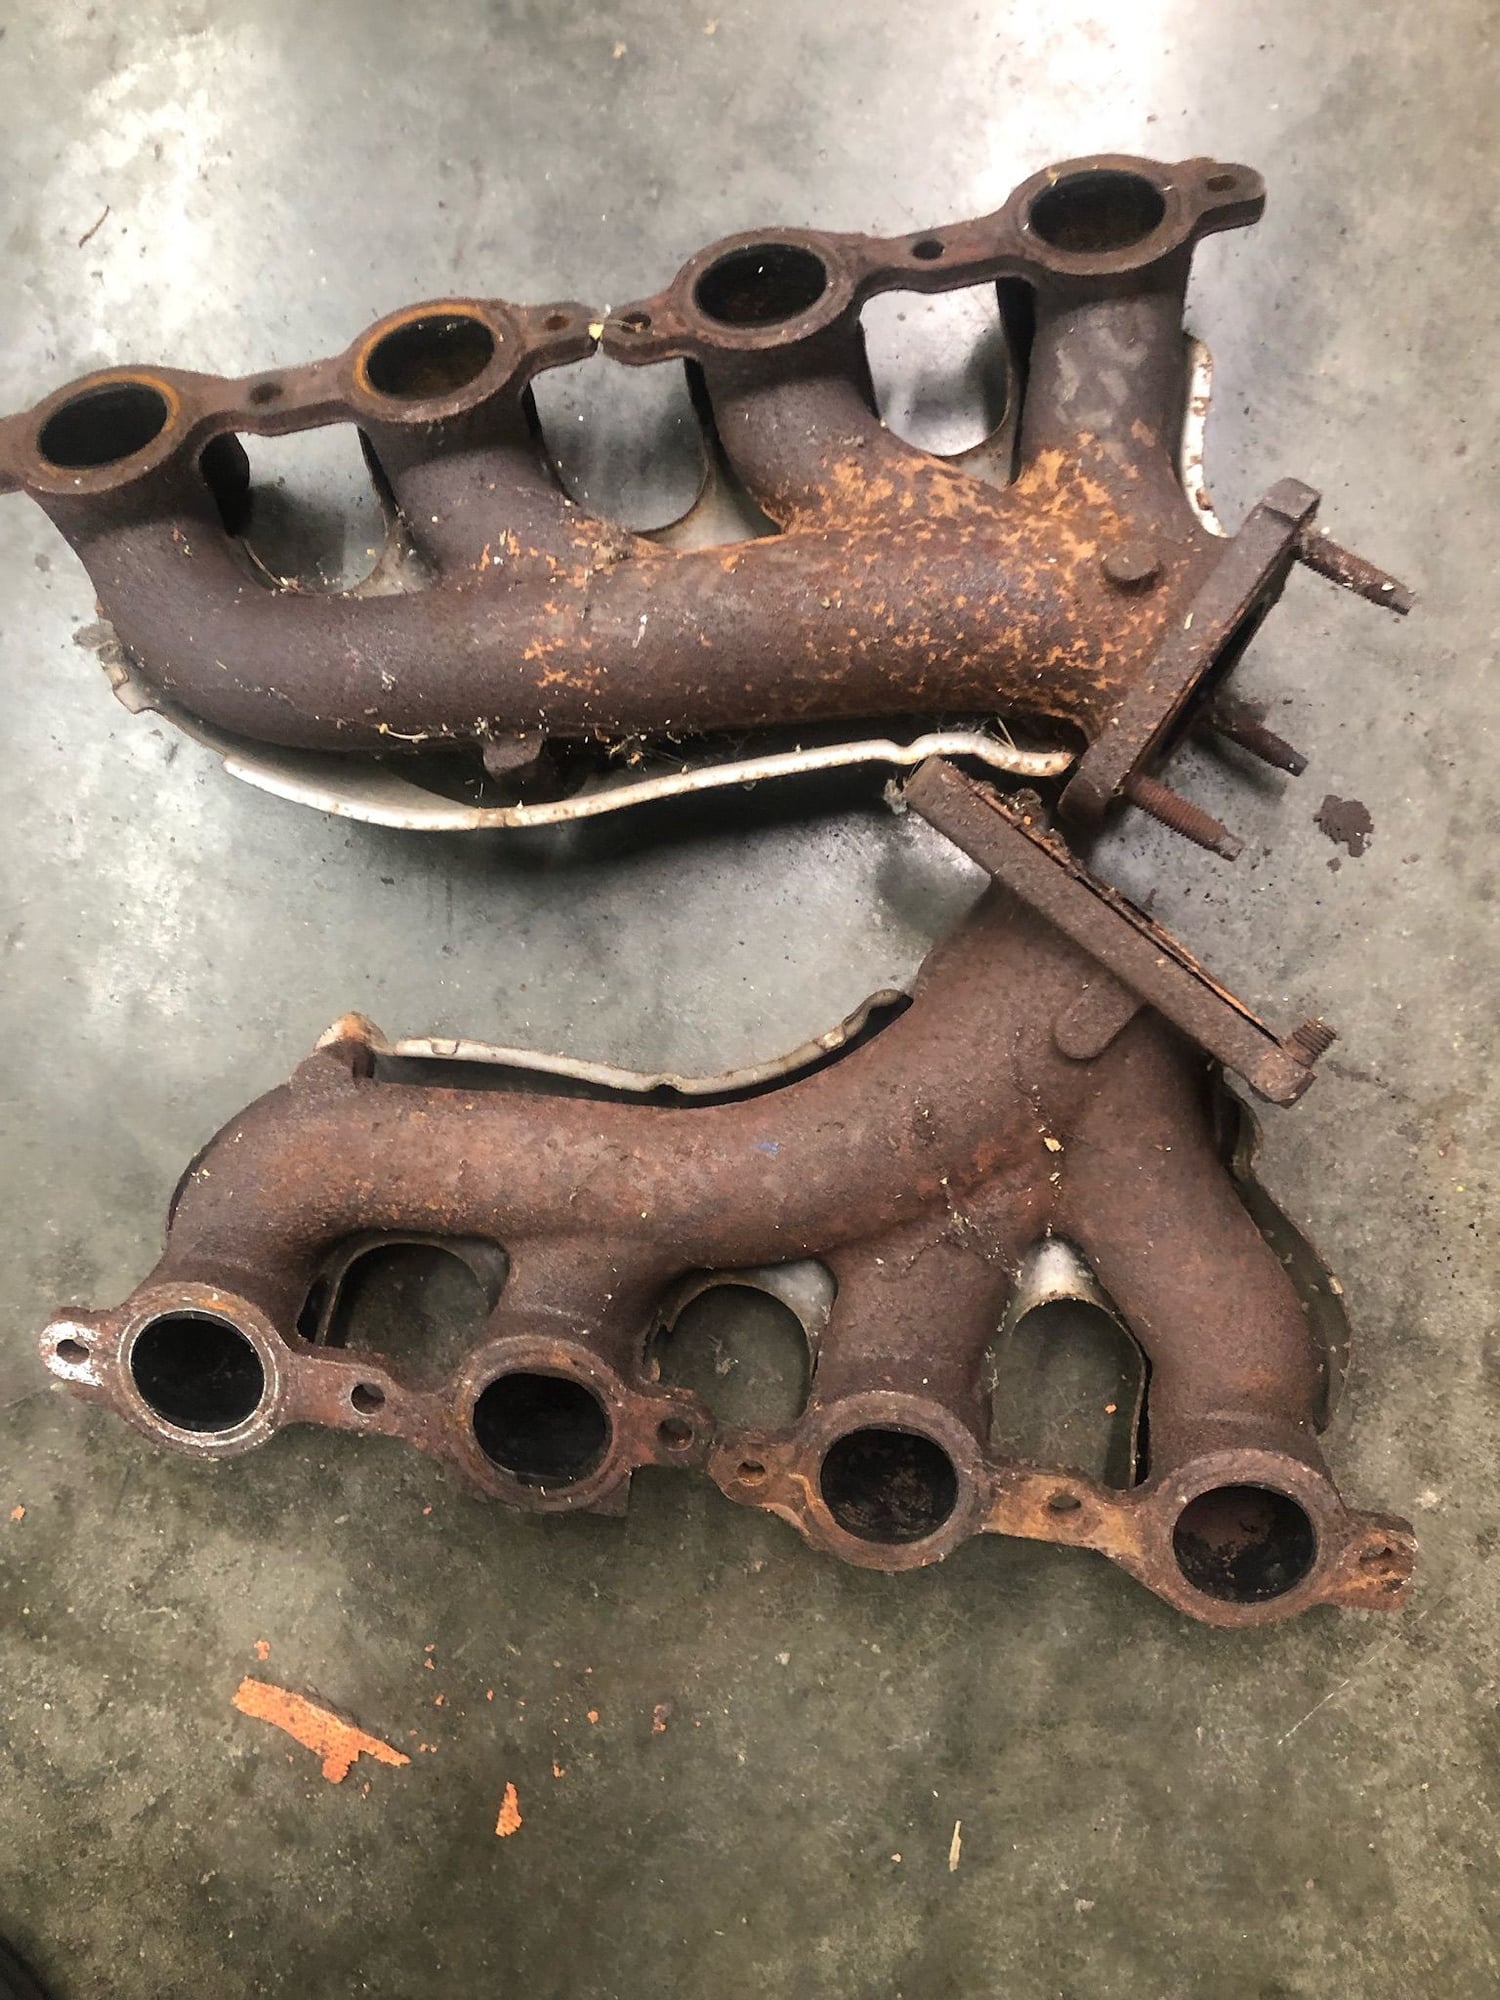 Engine - Exhaust - Exhaust manifolds from 2002 Trans Am - Used - 0  All Models - Hamilton, OH 45013, United States